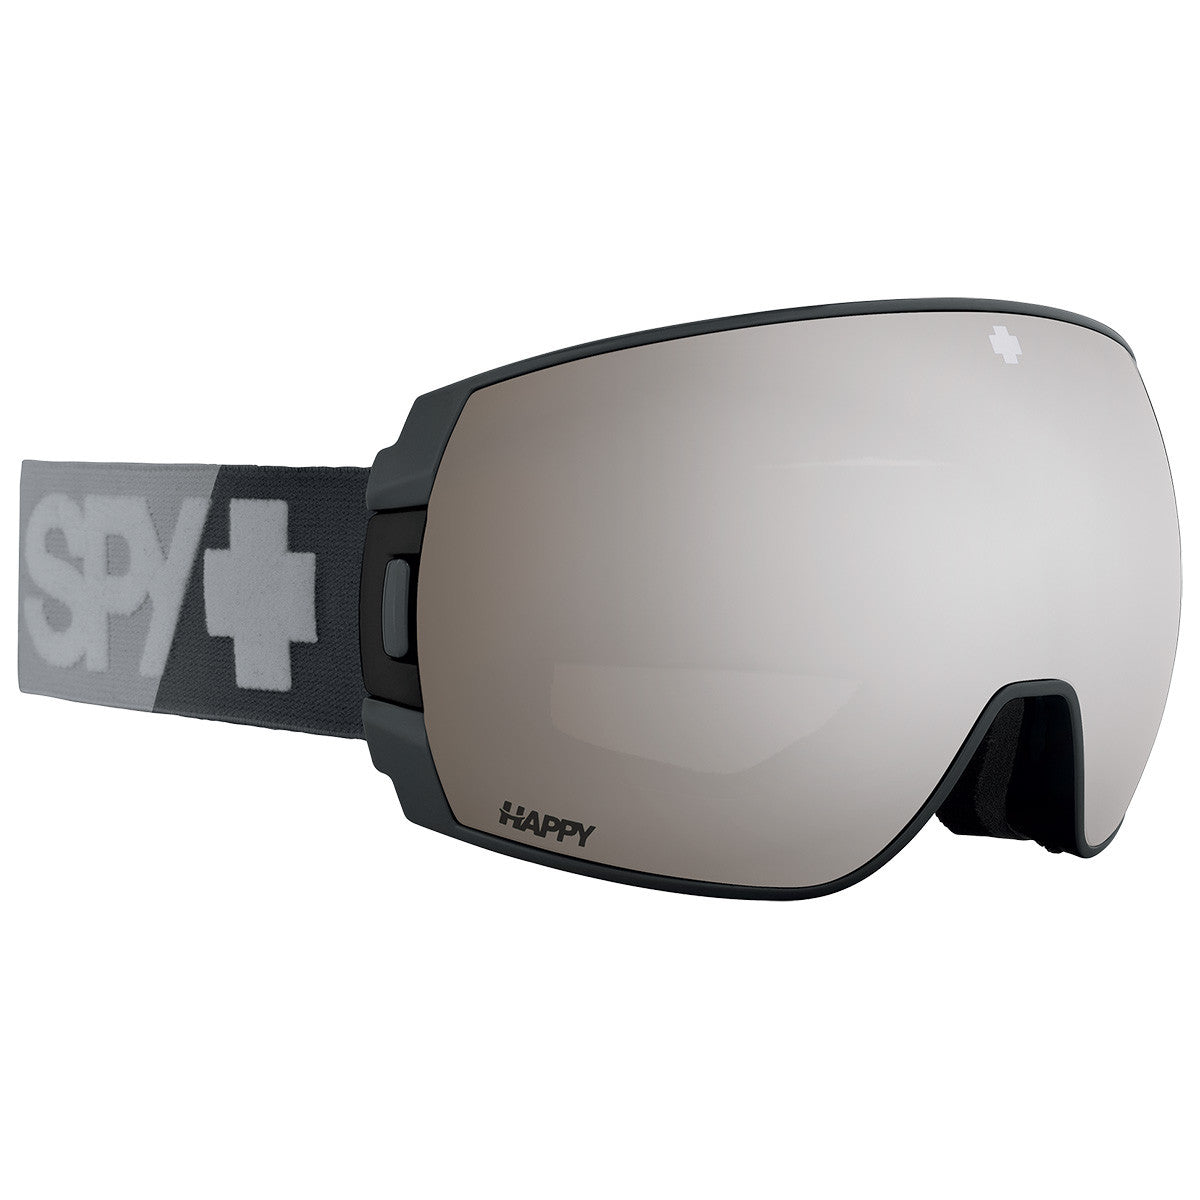 Spy LEGACY Goggles  Matte Colorblack 2.0 Dark Gray Large-Extra Large